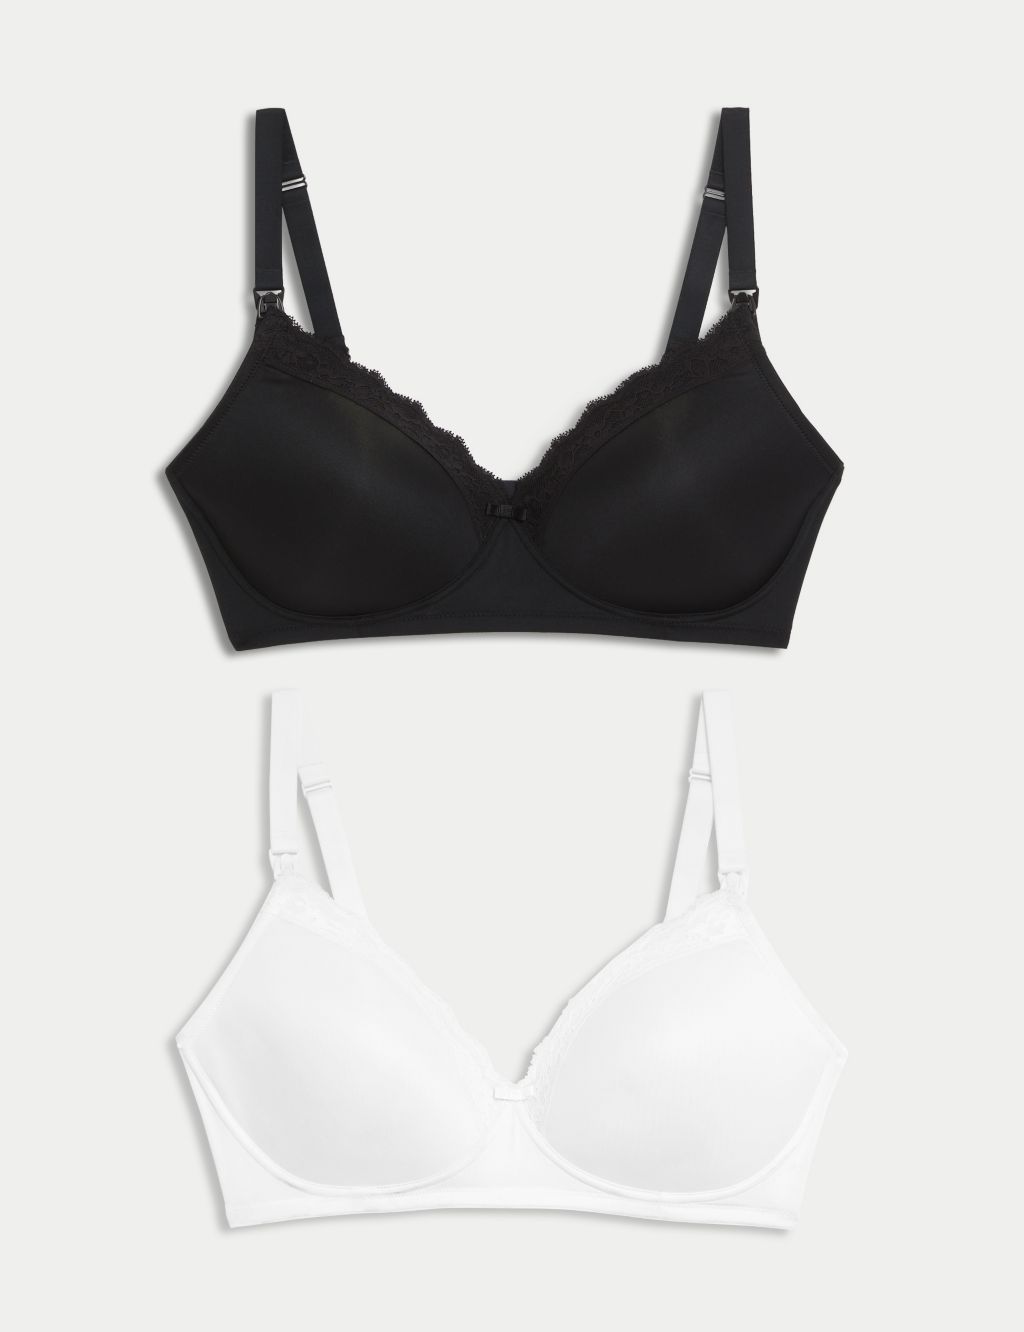 M&S has upset mums with 'terrible' name of maternity bra and